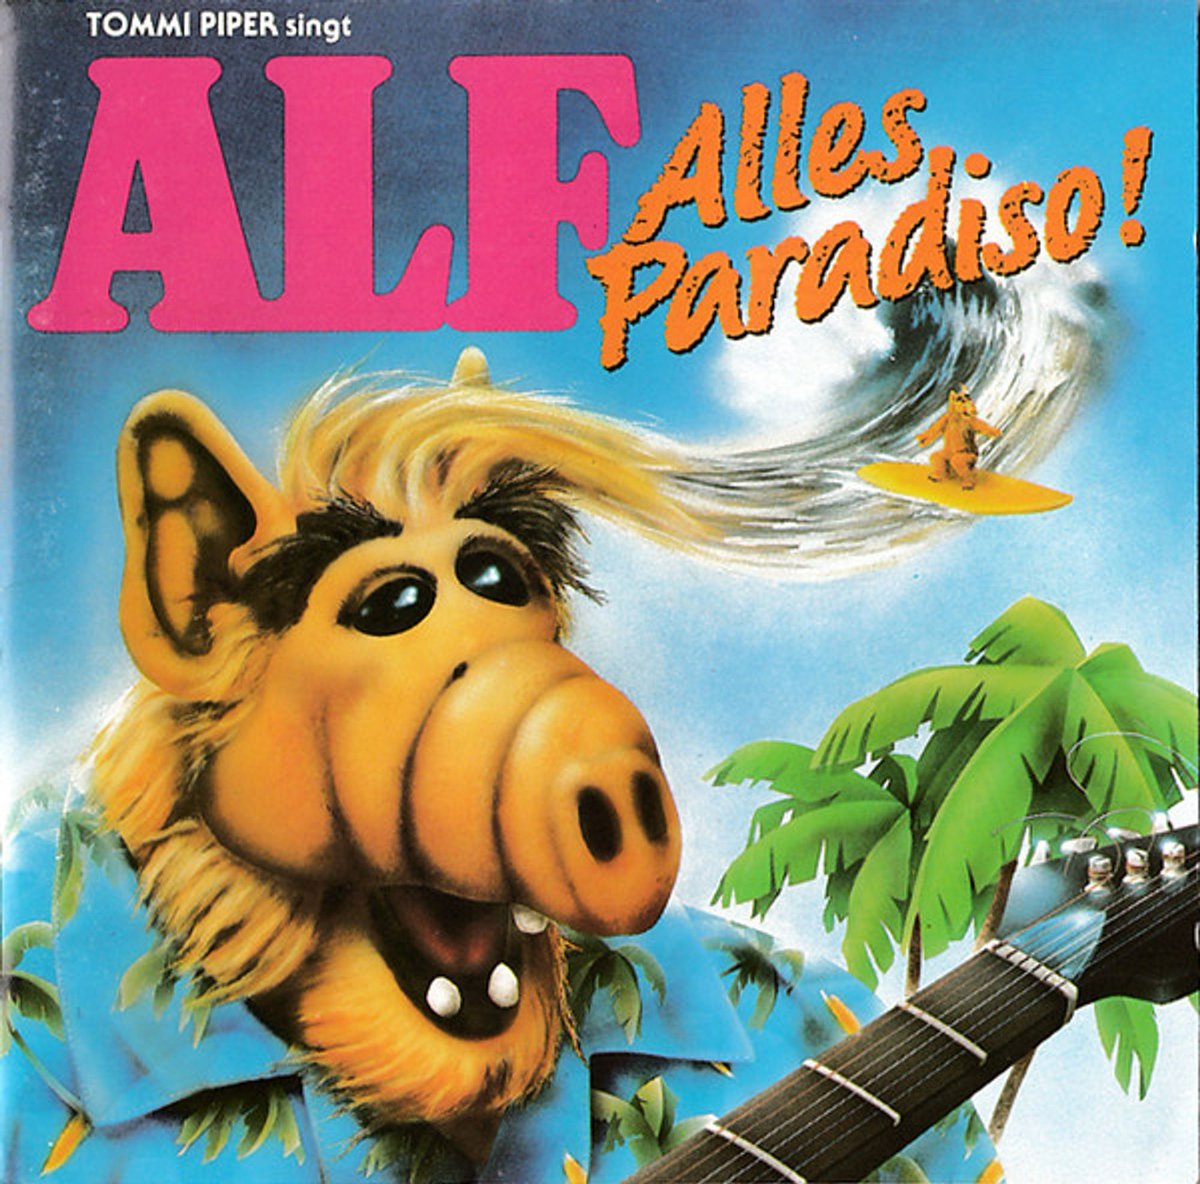 There's *lots* of ALF themed entertainment to keep you amused this weekend, episodes on Spotify, a look at ALF's German pop album on Patreon, a music video on YouTube, an unboxing video... we give you so much. Visit linktr.ee/ALFsplaining for everything.